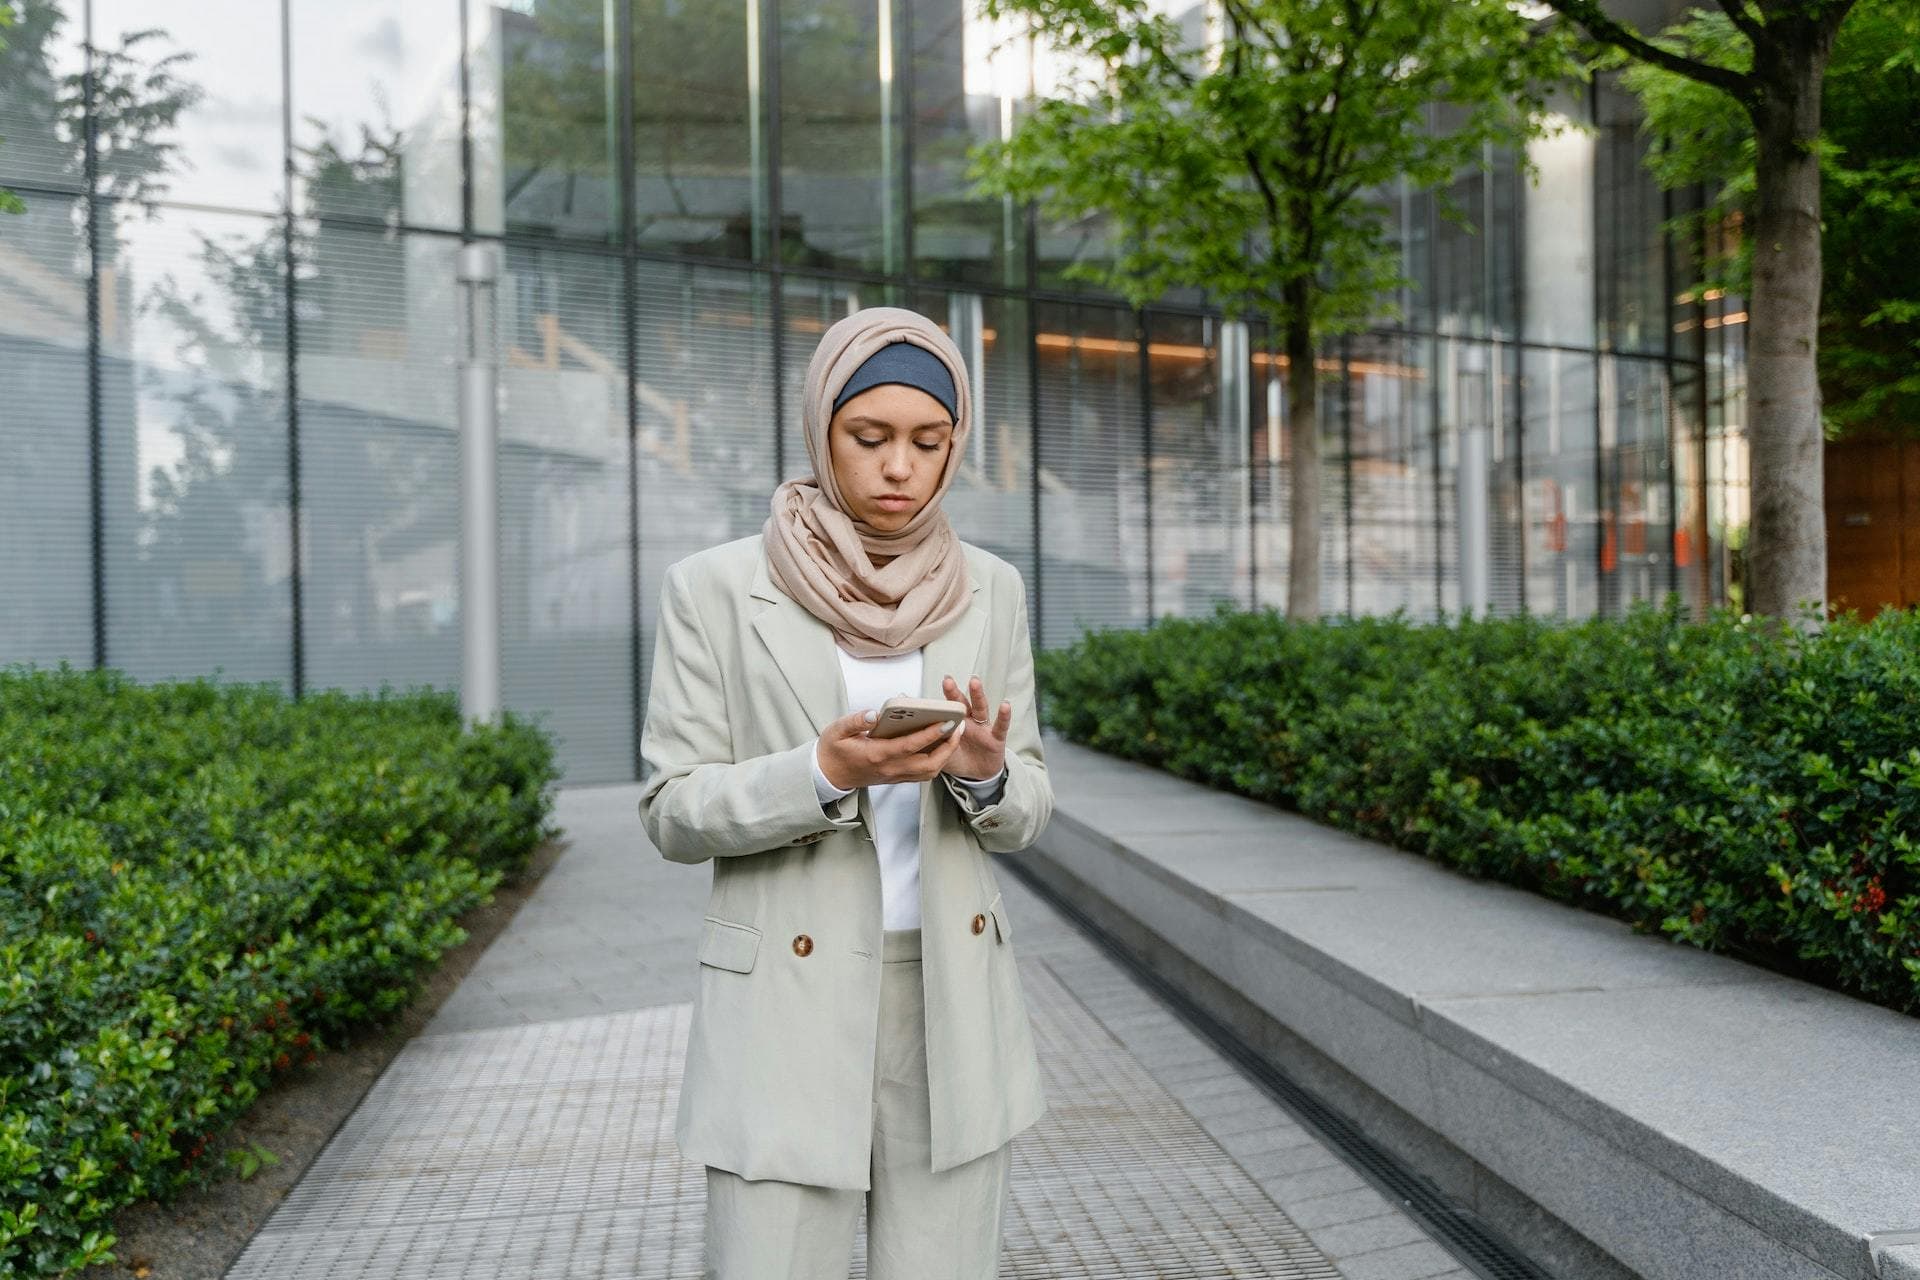 Woman wearing a hijab on phone outside building | I can’t pay my Corporation Tax bill. What can I do?